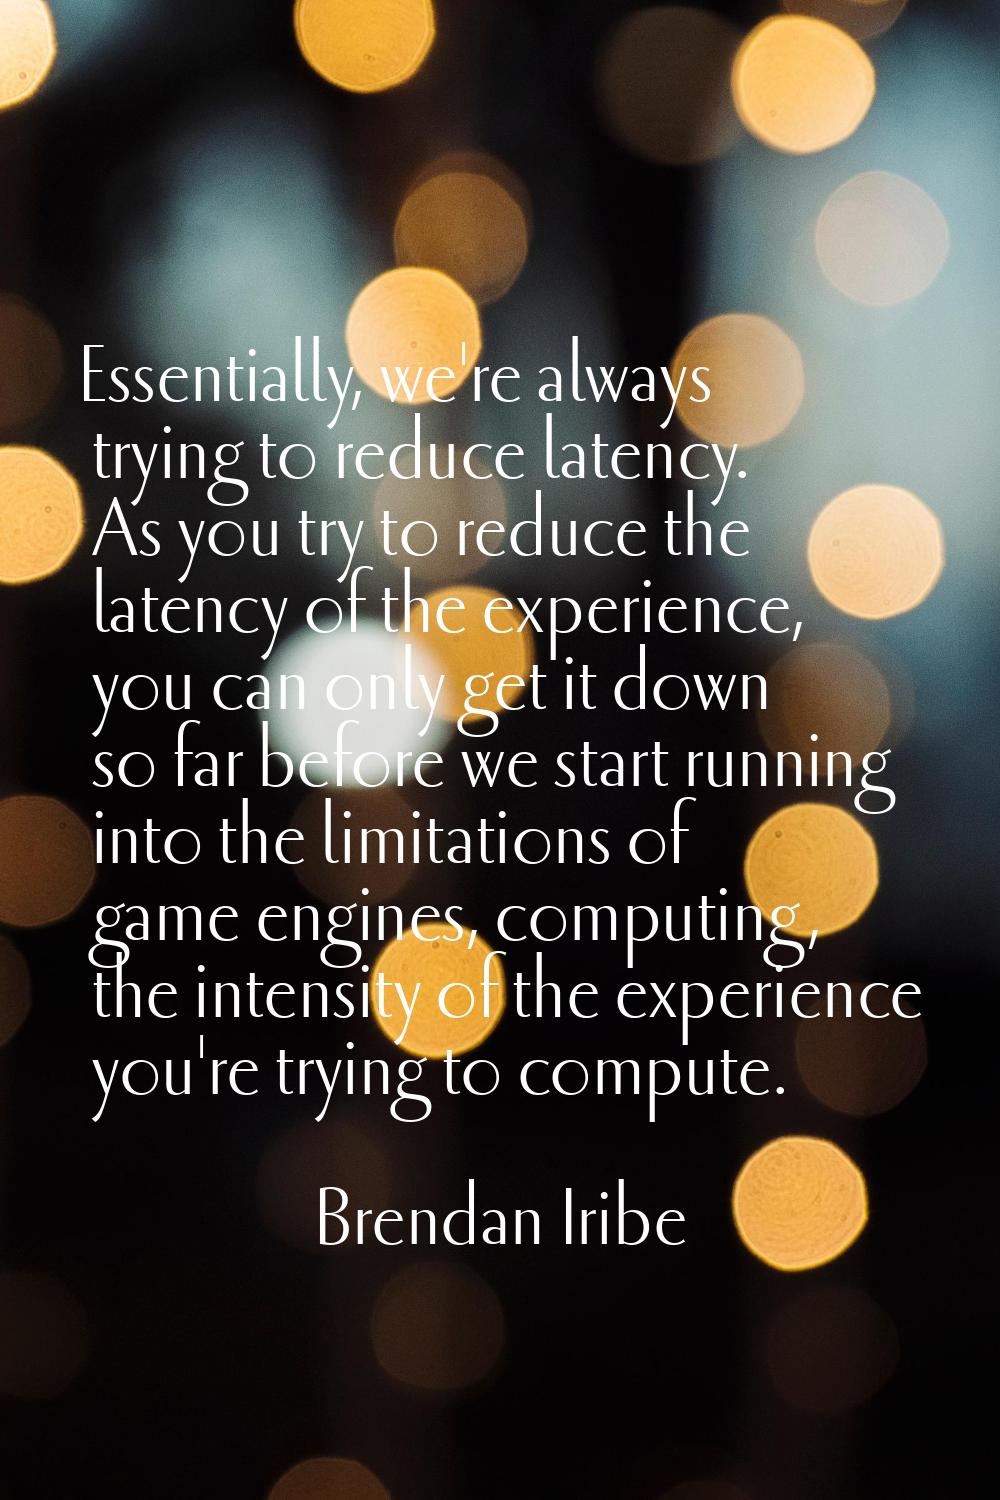 Essentially, we're always trying to reduce latency. As you try to reduce the latency of the experie